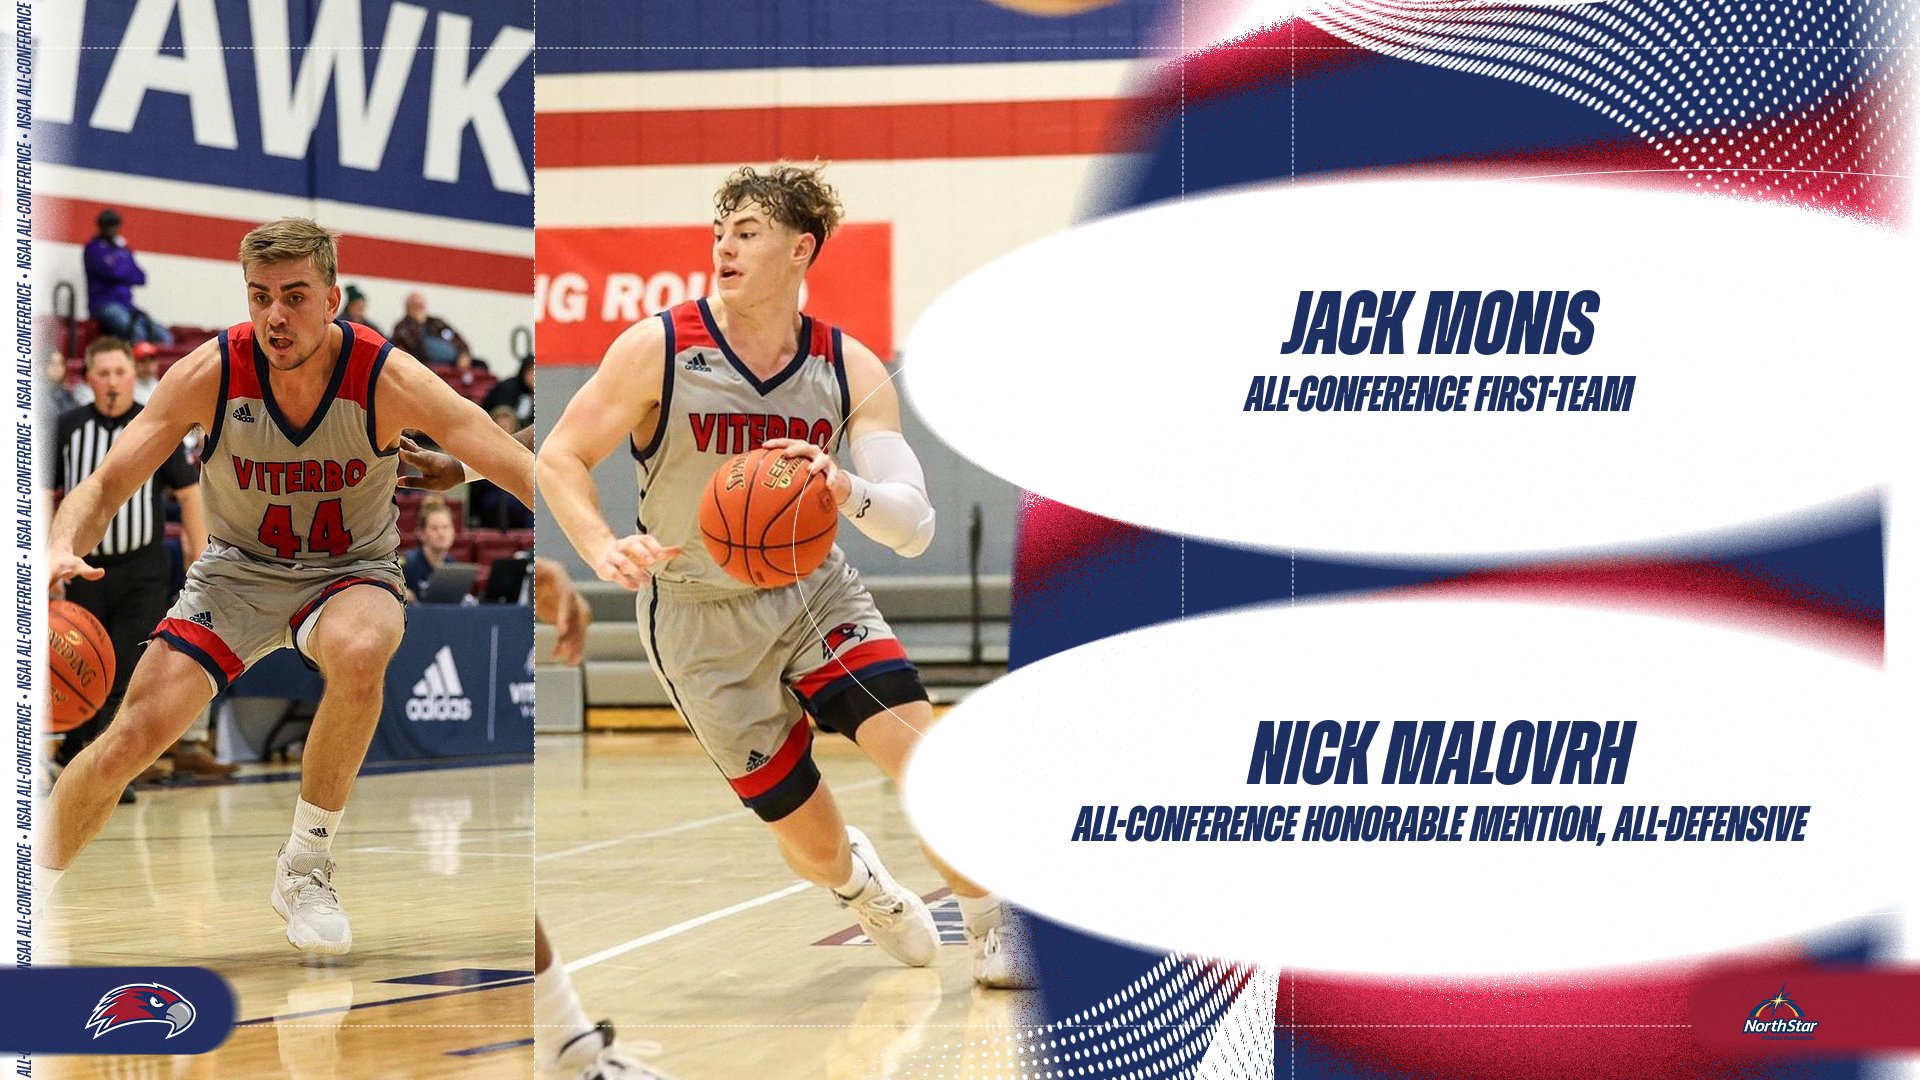 Monis and Malovrh Receive All-Conference Honors